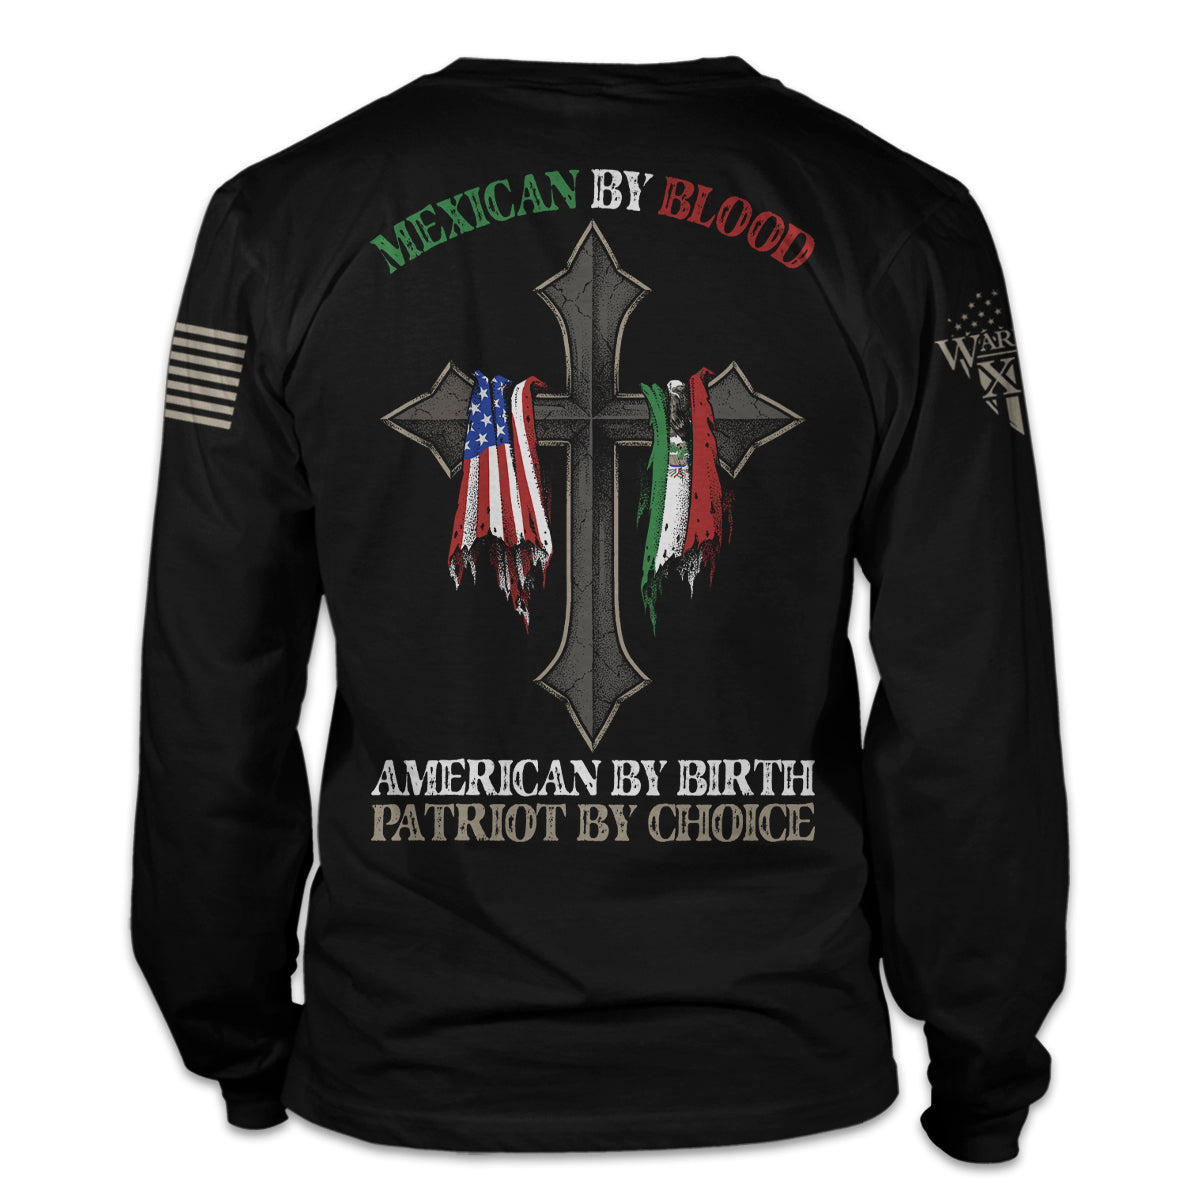 A black long sleeve shirt with the words "Mexican by blood, American by birth, patriot by choice" with a cross holding the American and Mexican flag printed on the back of the shirt.